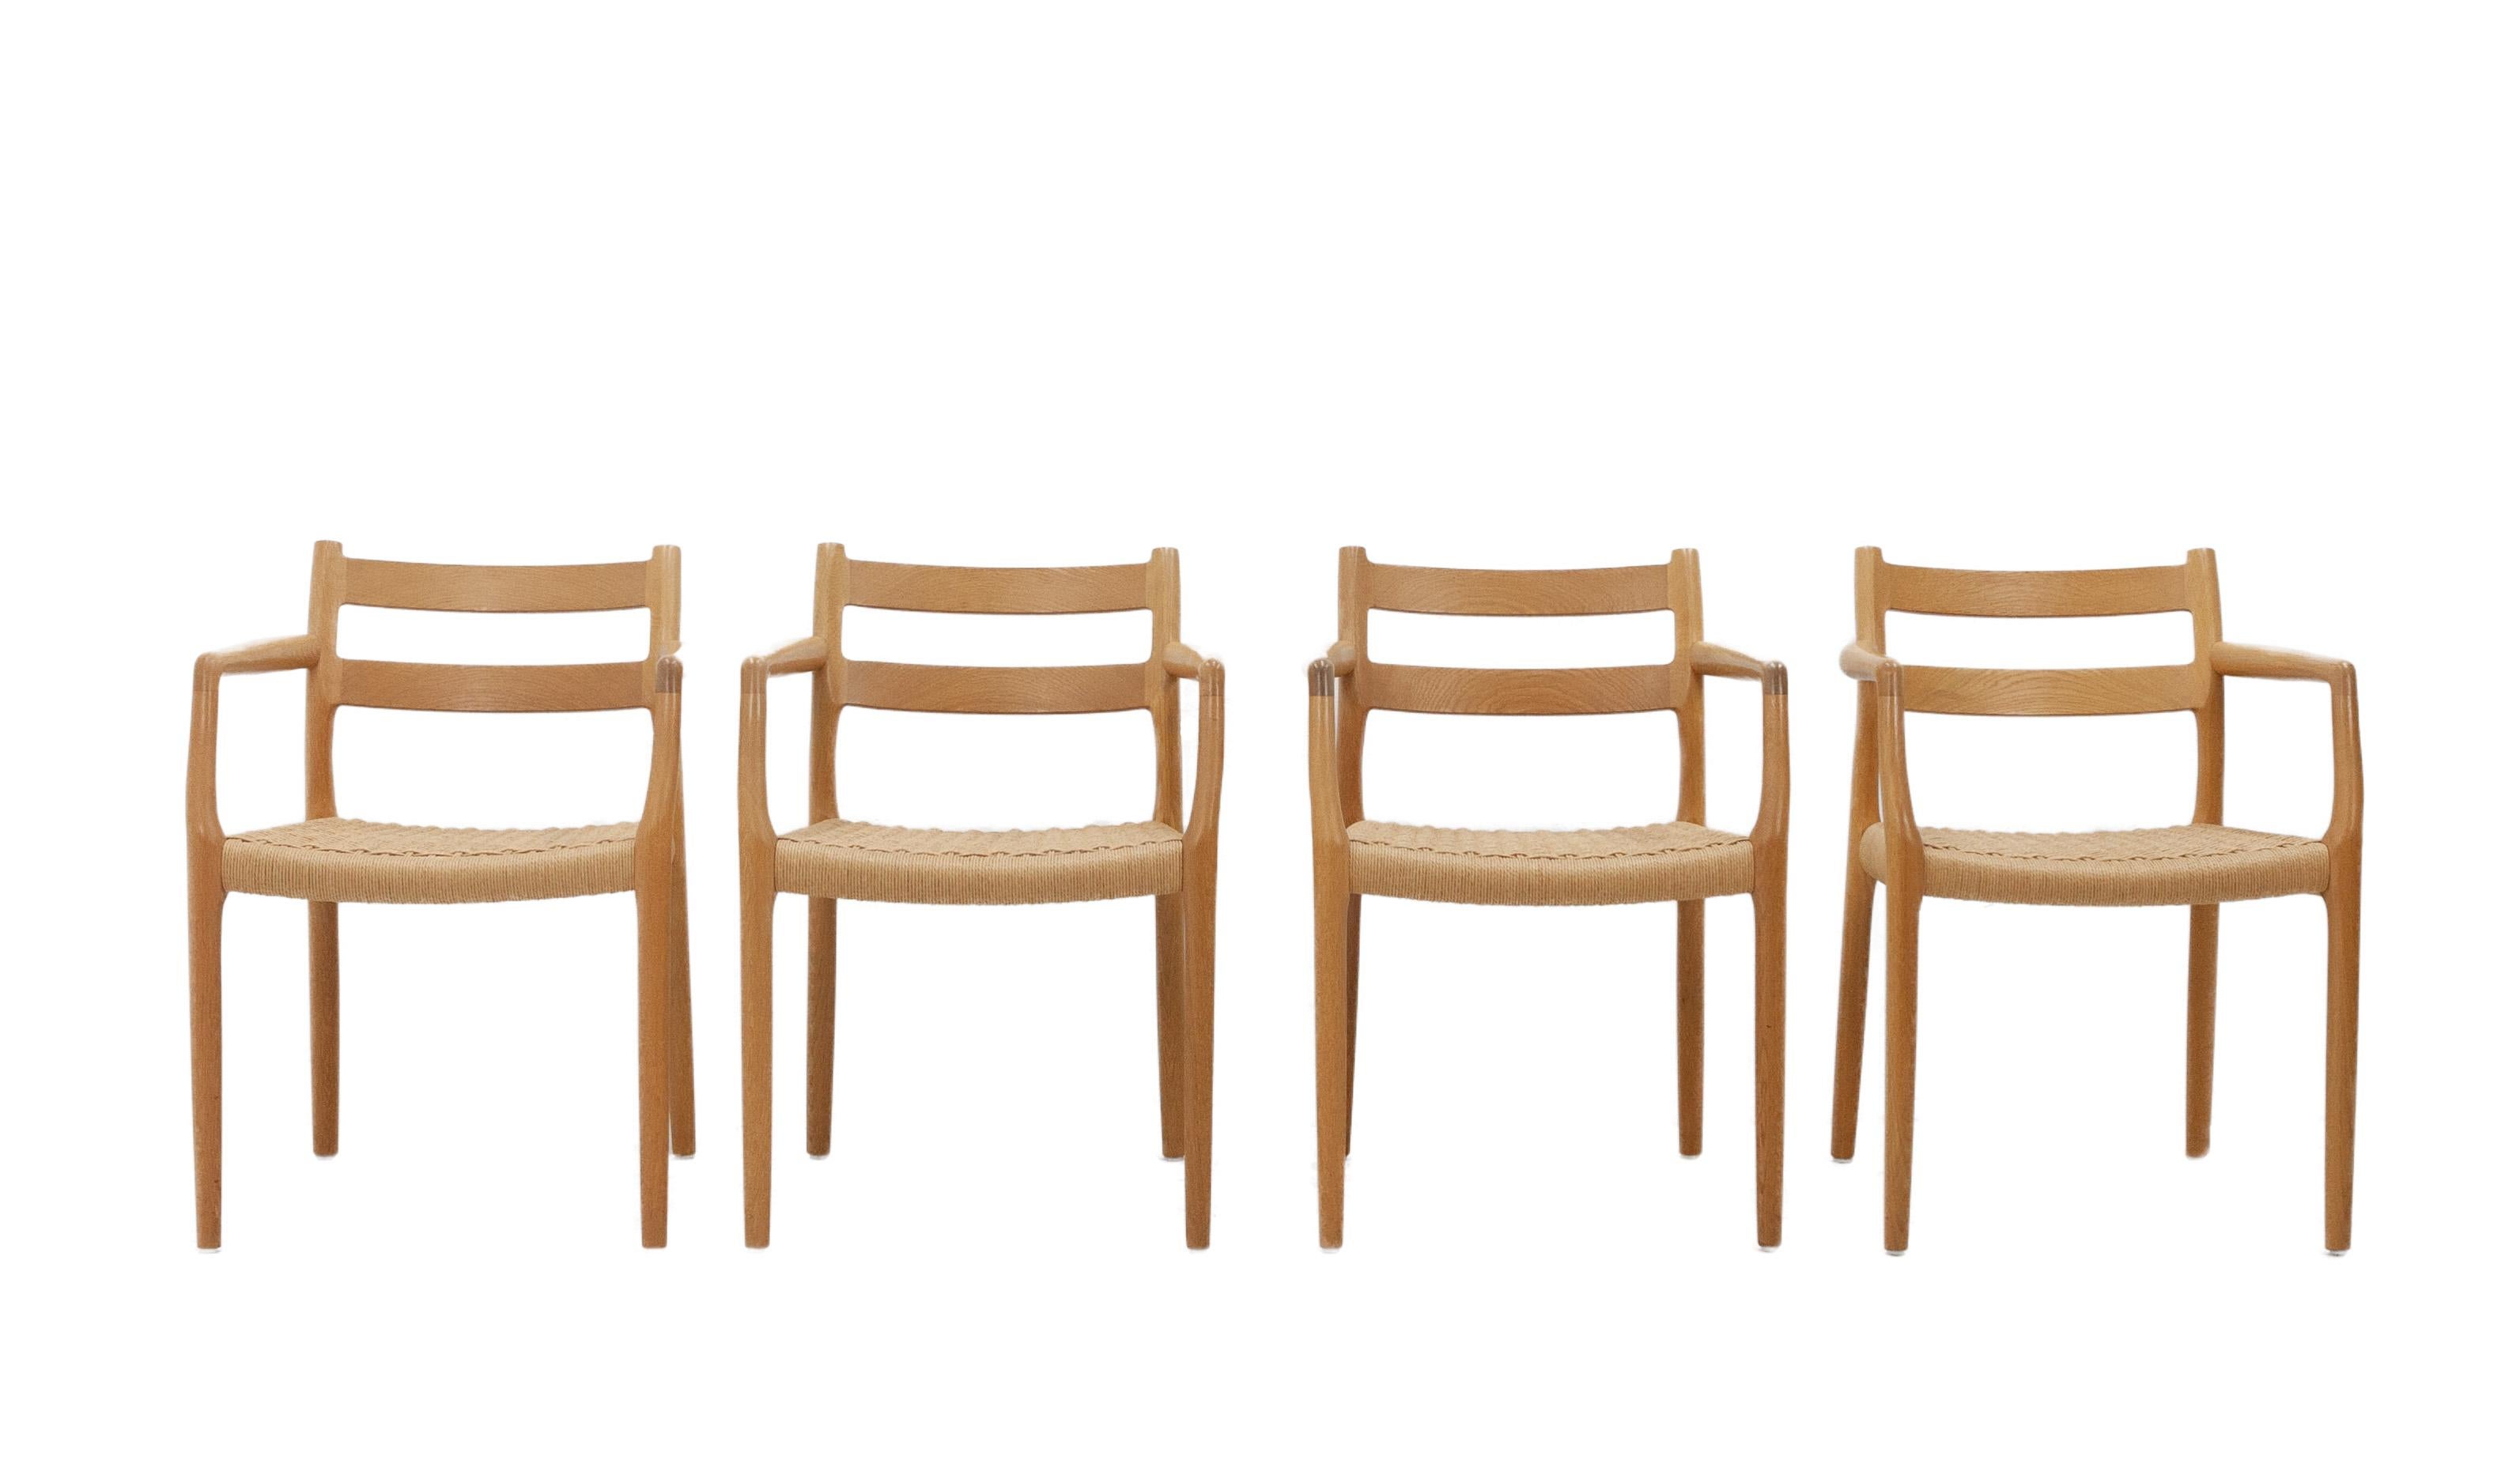 Four Niels Moller model 67 chairs designed by Niels Otto Moller for J.L. Moller, 1970s. These chairs are one of the J.L. Moller company's landmark designs. They feature two curved support strips across the backrest, gracefully sculpted arm rests and